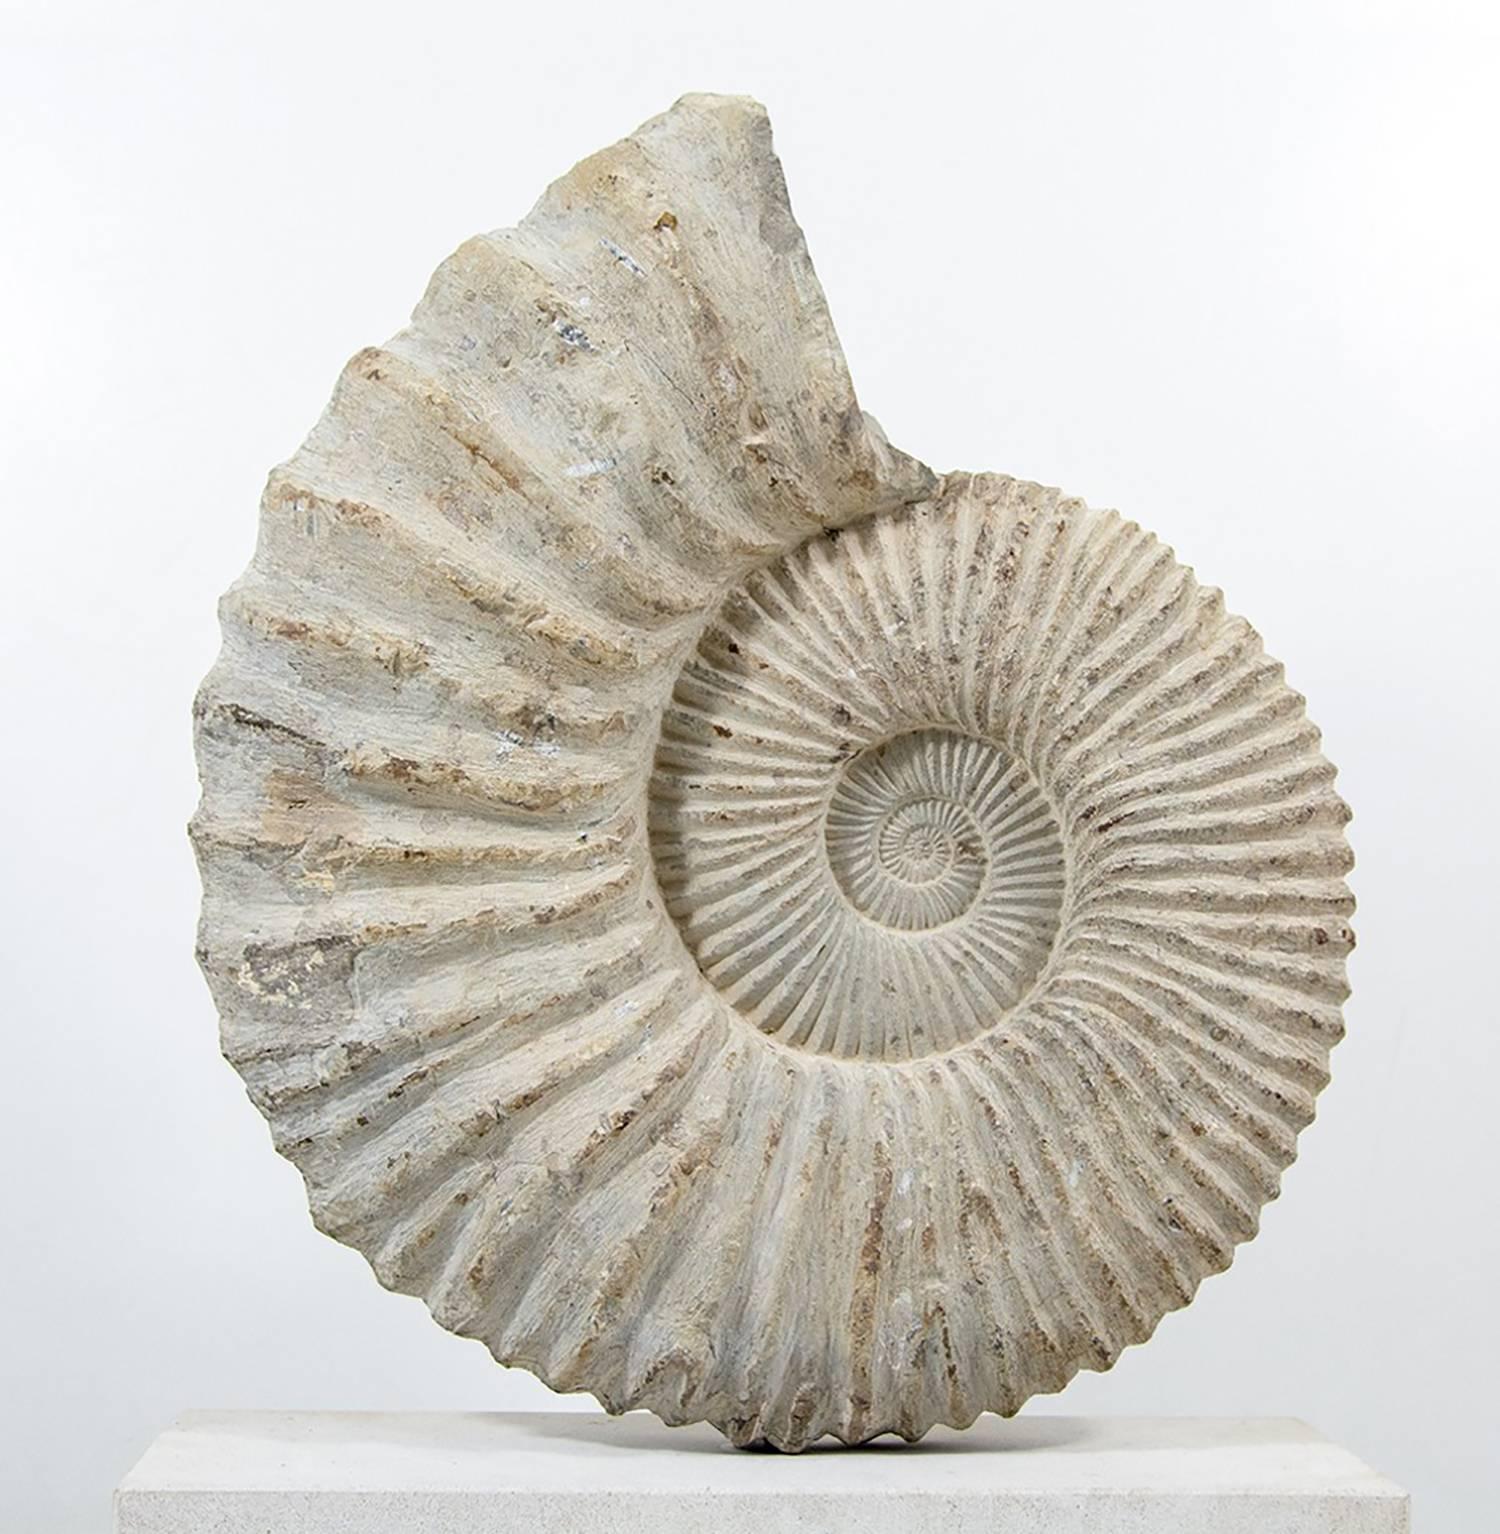 
A large and Classic fossil ammonite set onto a British Portland limestone base.

The ammonite is set on a uniquely designed swivel stainless steel pin which enables detachment for transport or shipping and allows the ammonite to be accented in